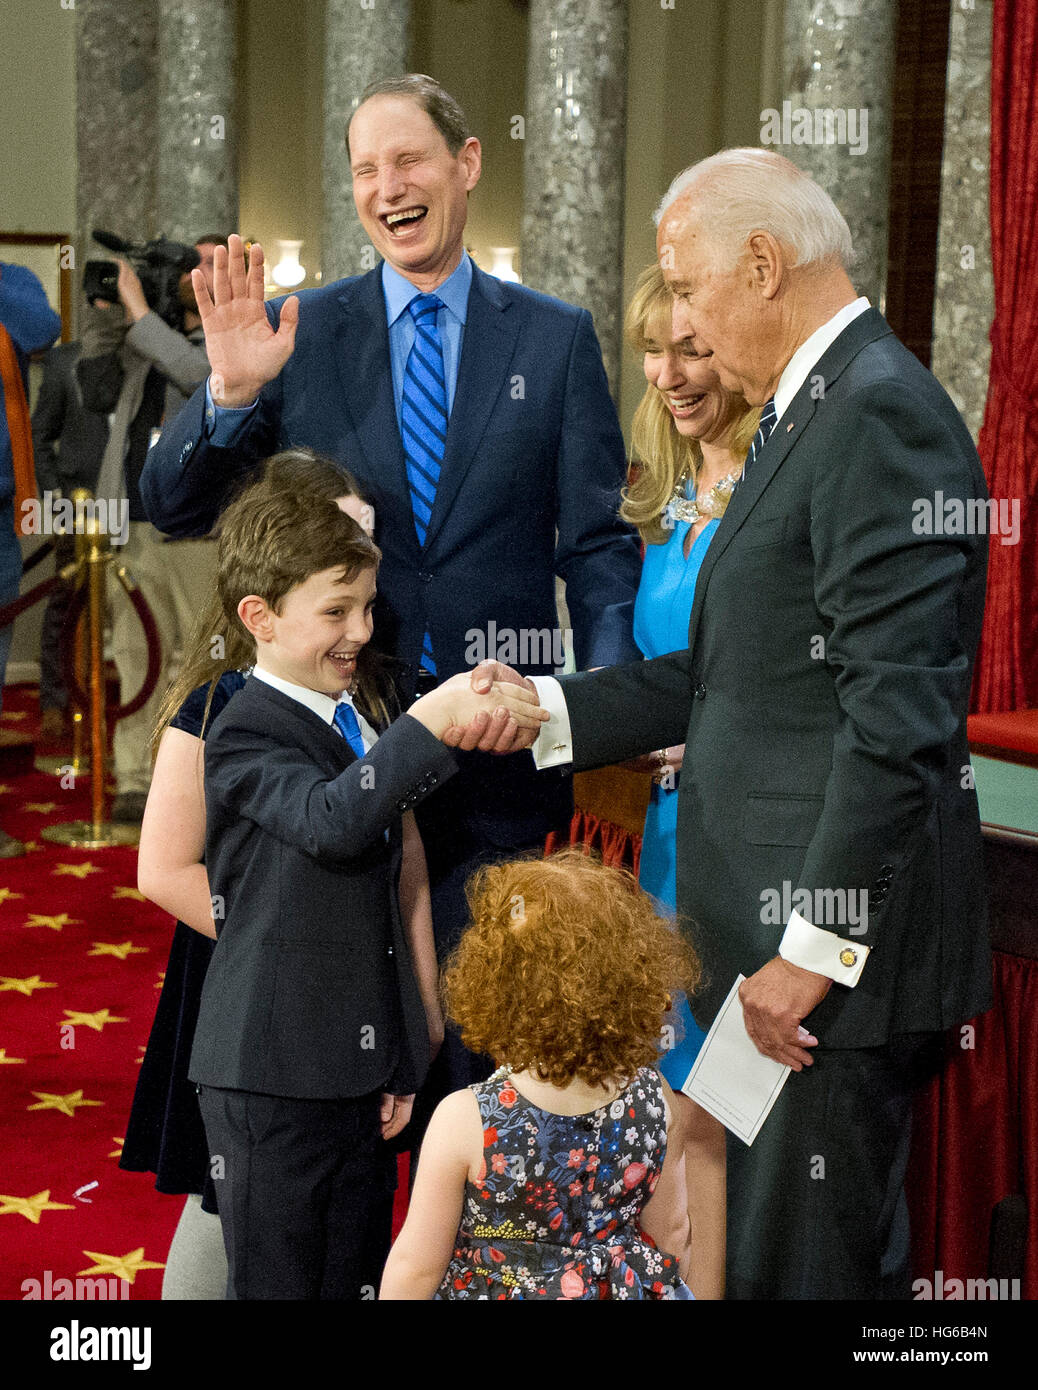 United States Vice President Joe Biden, right, shakes hands with Peter Wyden, who imitated his Dad, US Senator Ron Wyden (Democrat of Oregon) taking the oath of office, center, following a mock swearing-in ceremony in the Old US Senate Chamber in the US Capitol in Washington, DC on Tuesday, January 3, 2017. Also pictured are Wyden's wife, Nancy Bass Wyden and daughters Ava Rose Wyden and Scarlett Willa Wyden. Credit: Ron Sachs/CNP (RESTRICTION: NO New York or New Jersey Newspapers or newspapers within a 75 mile radius of New York City) - NO WIRE SERVICE Foto: Ron Sachs/Consolidated News Pho Stock Photo